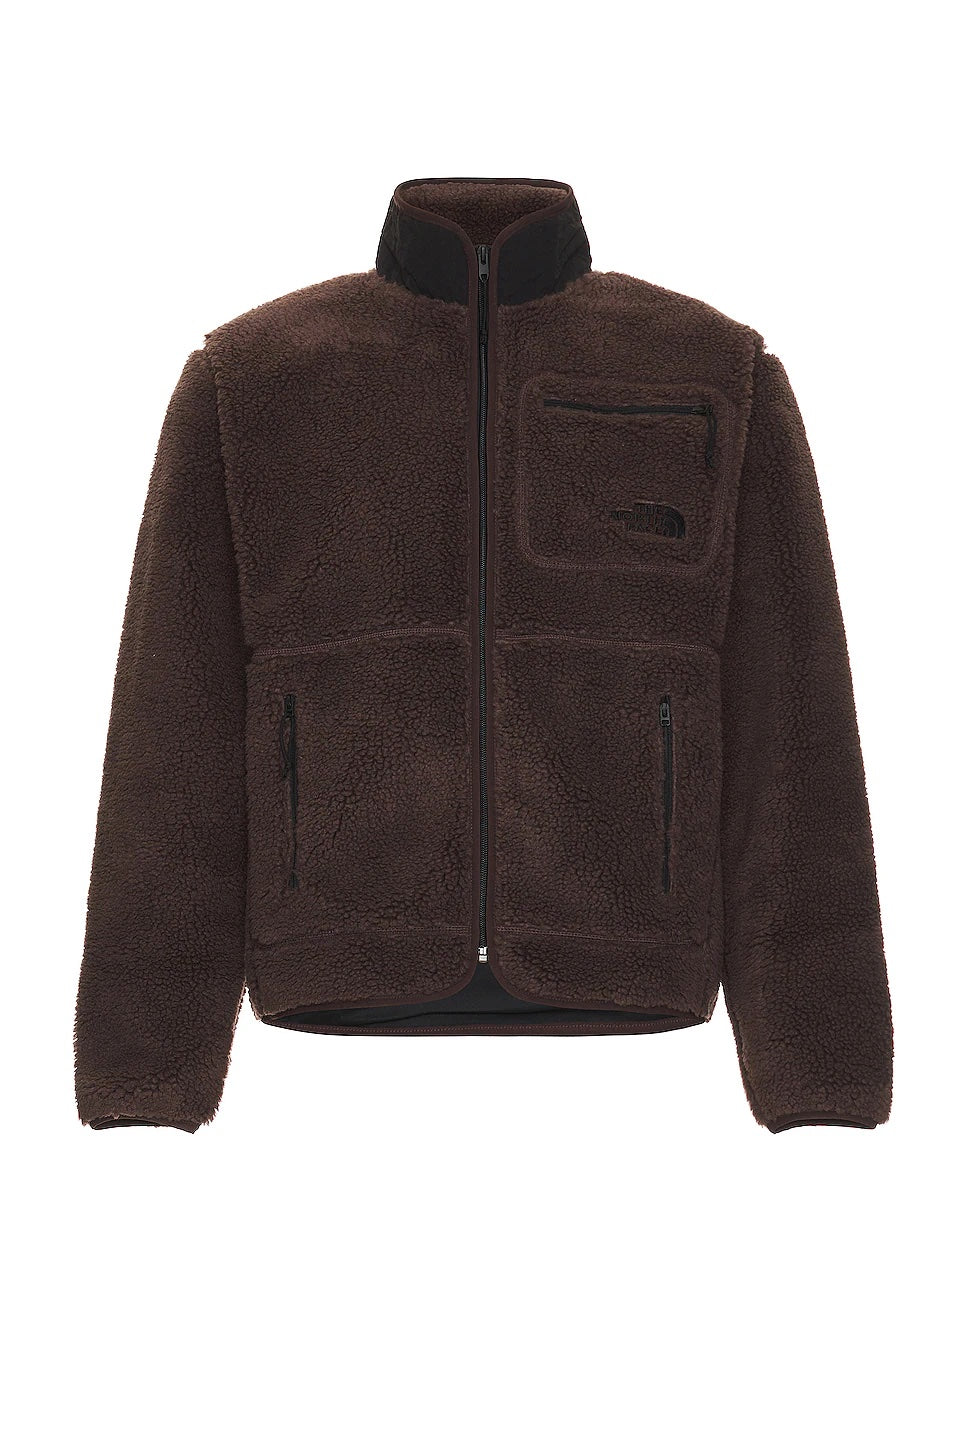 The North Face Extreme Pile FZ Jacket / Coal Brown